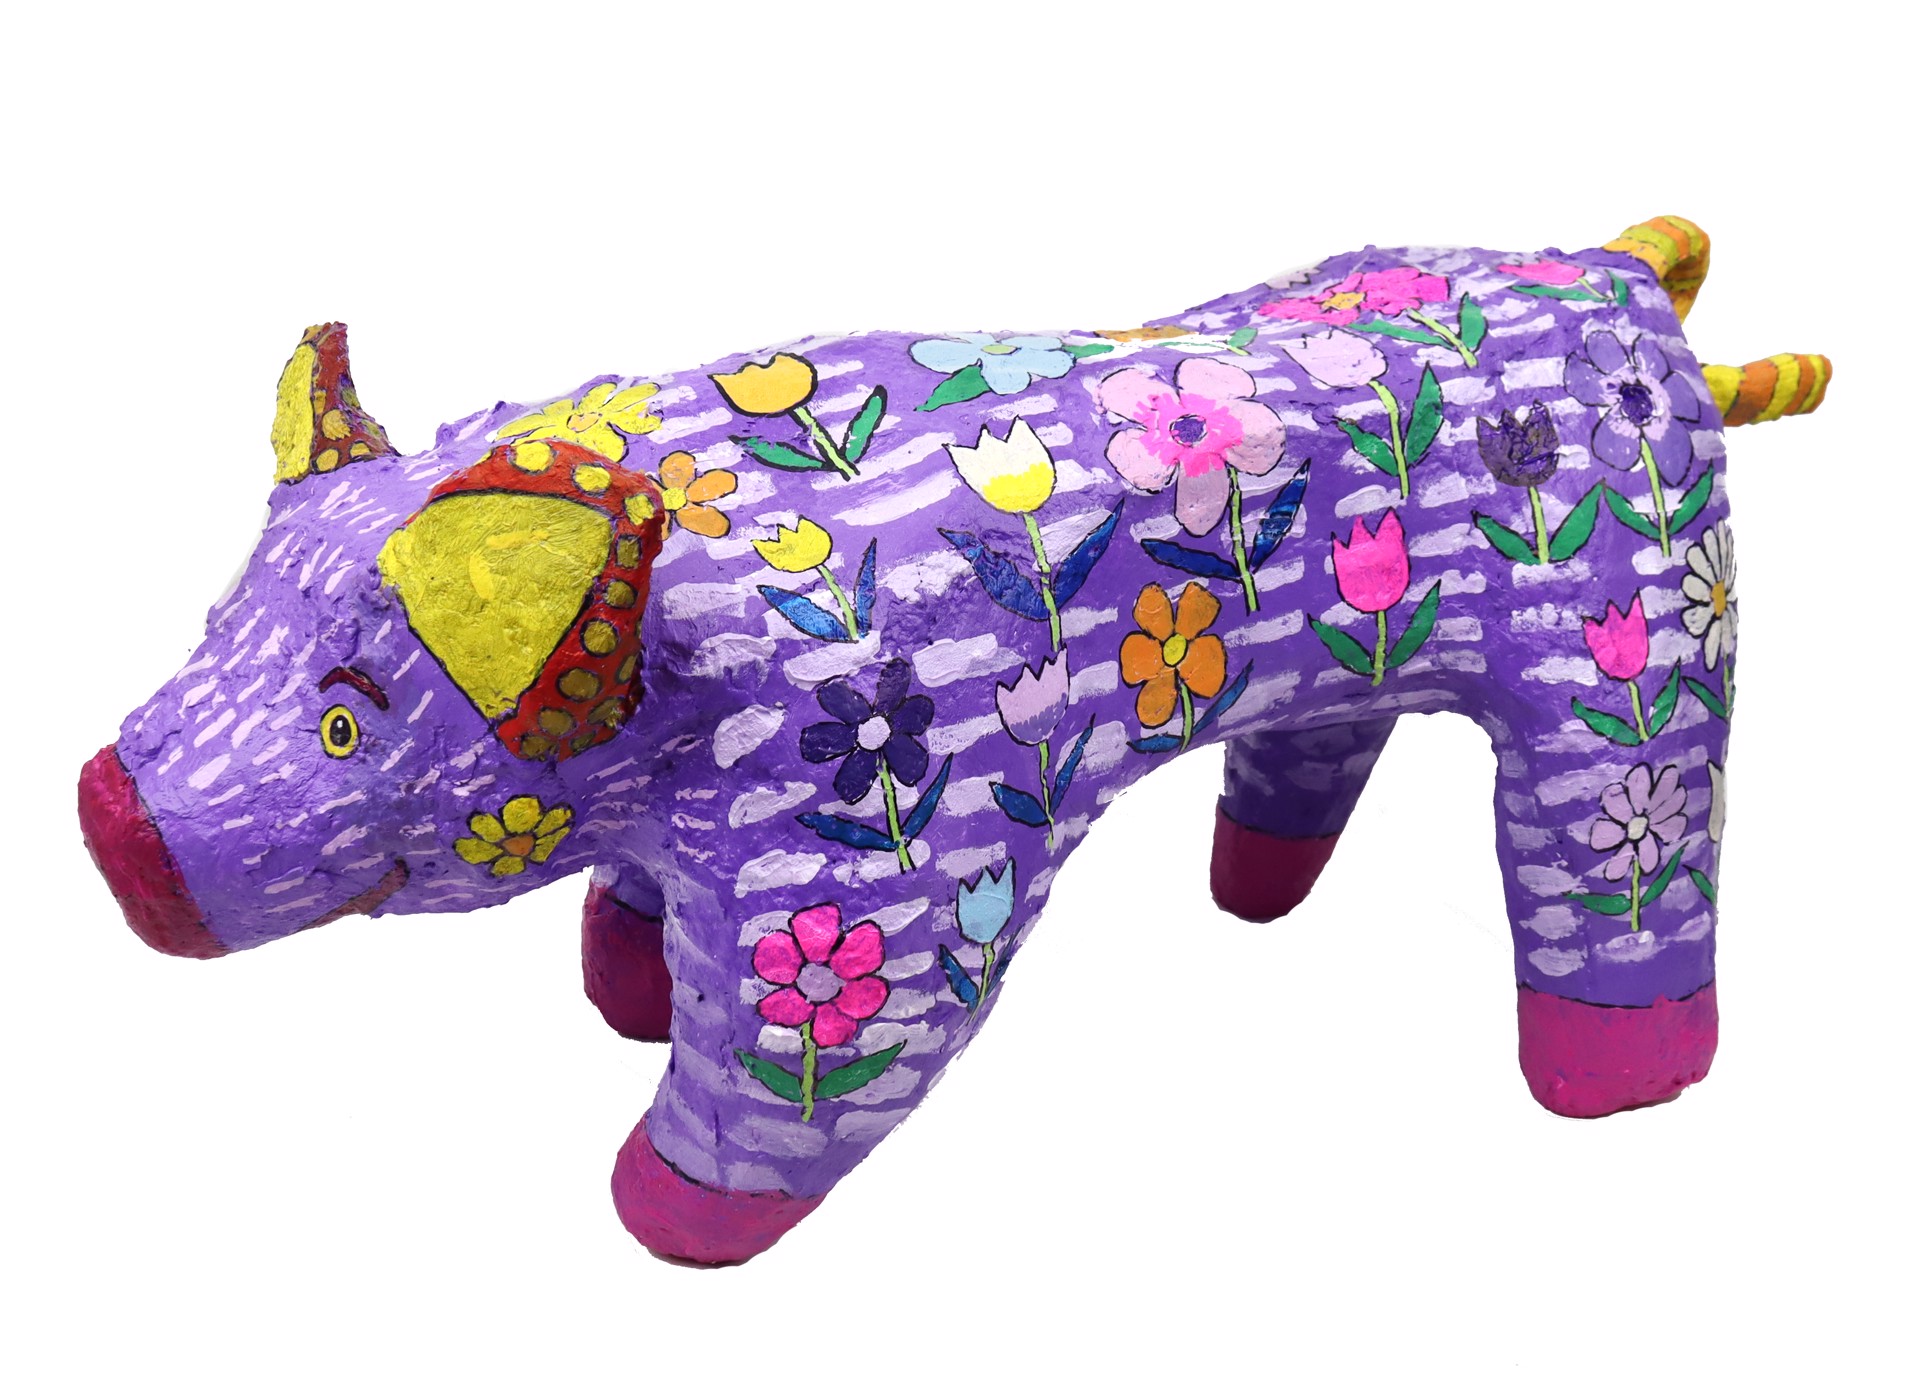 Purple Pig with Flowers by Jacqueline Coleman